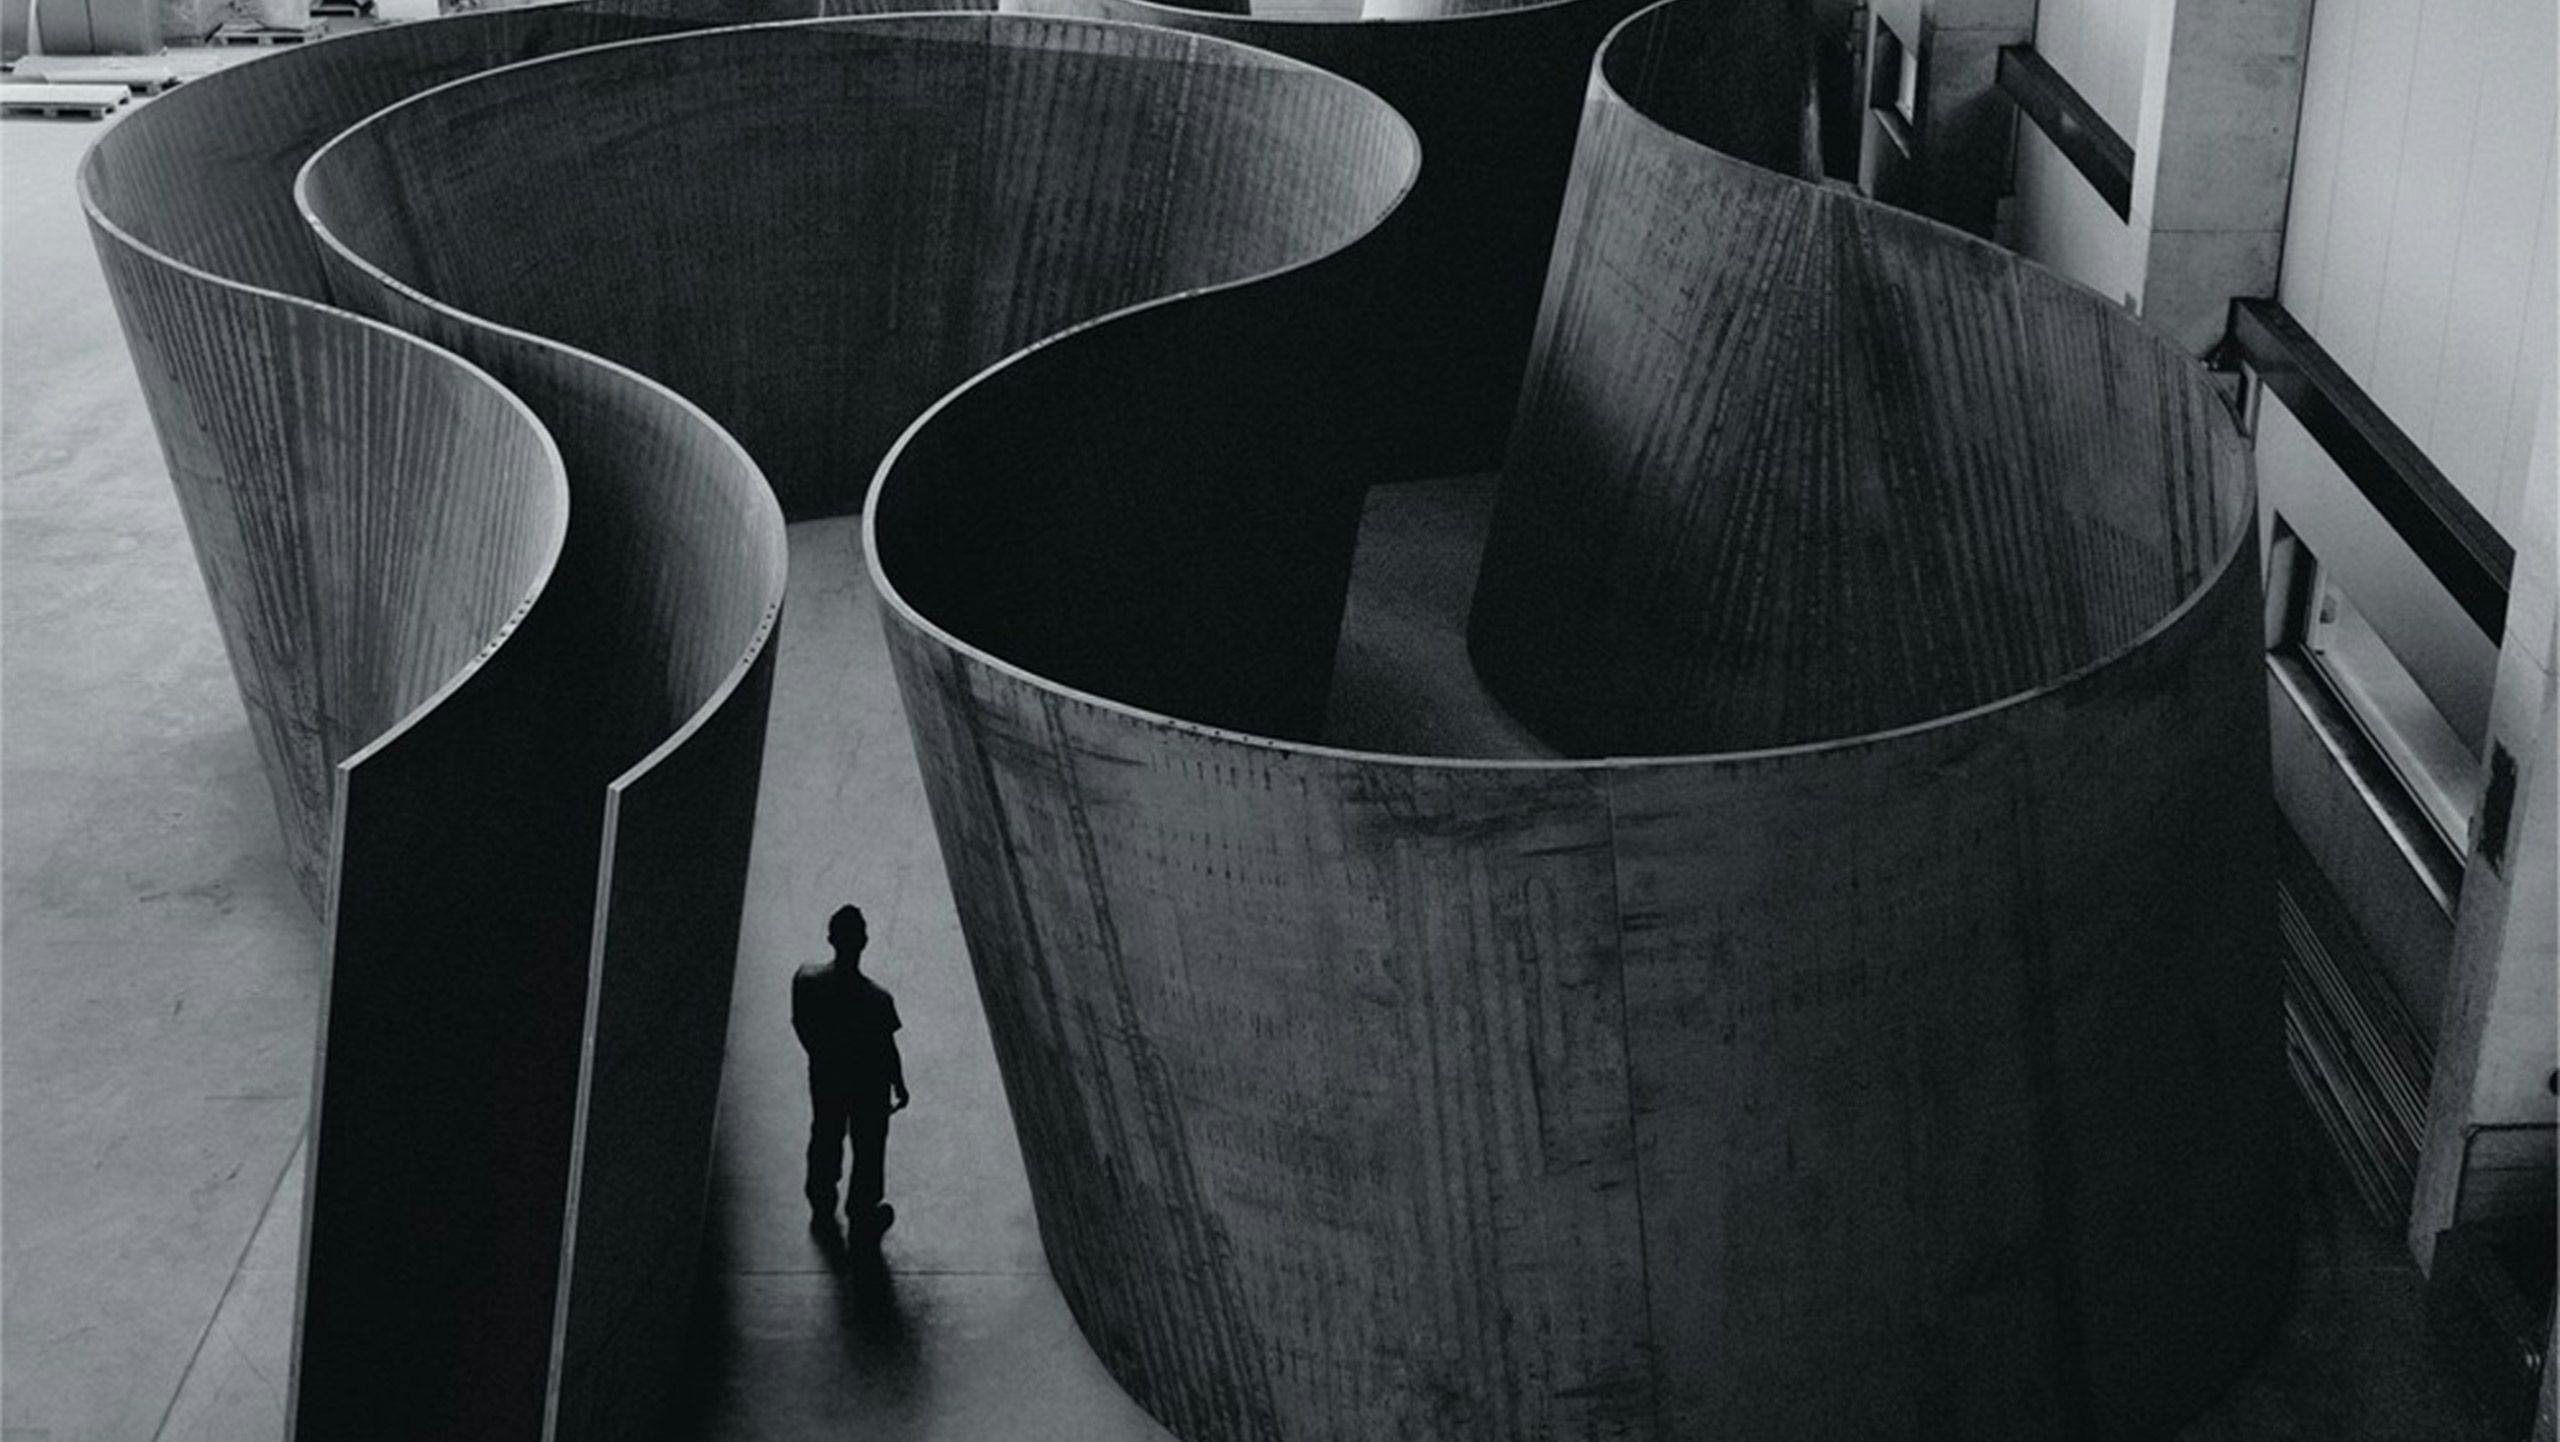 An installation by Richard Serra, titled Inside Out, dated 2013.